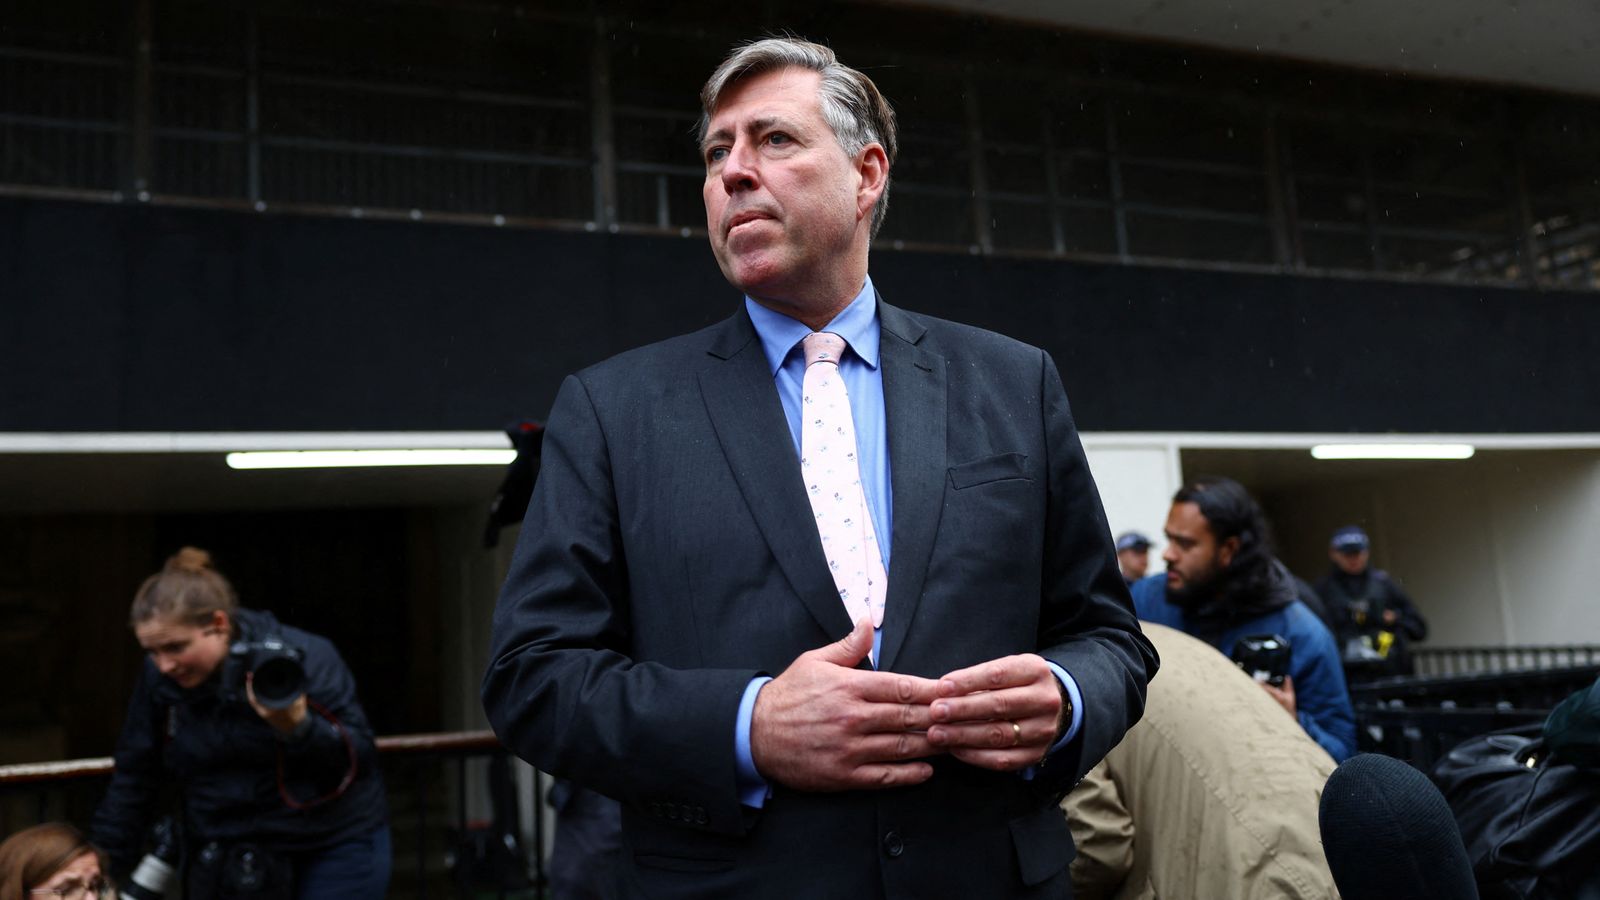 Sir Graham Brady to stand down as MP at next election